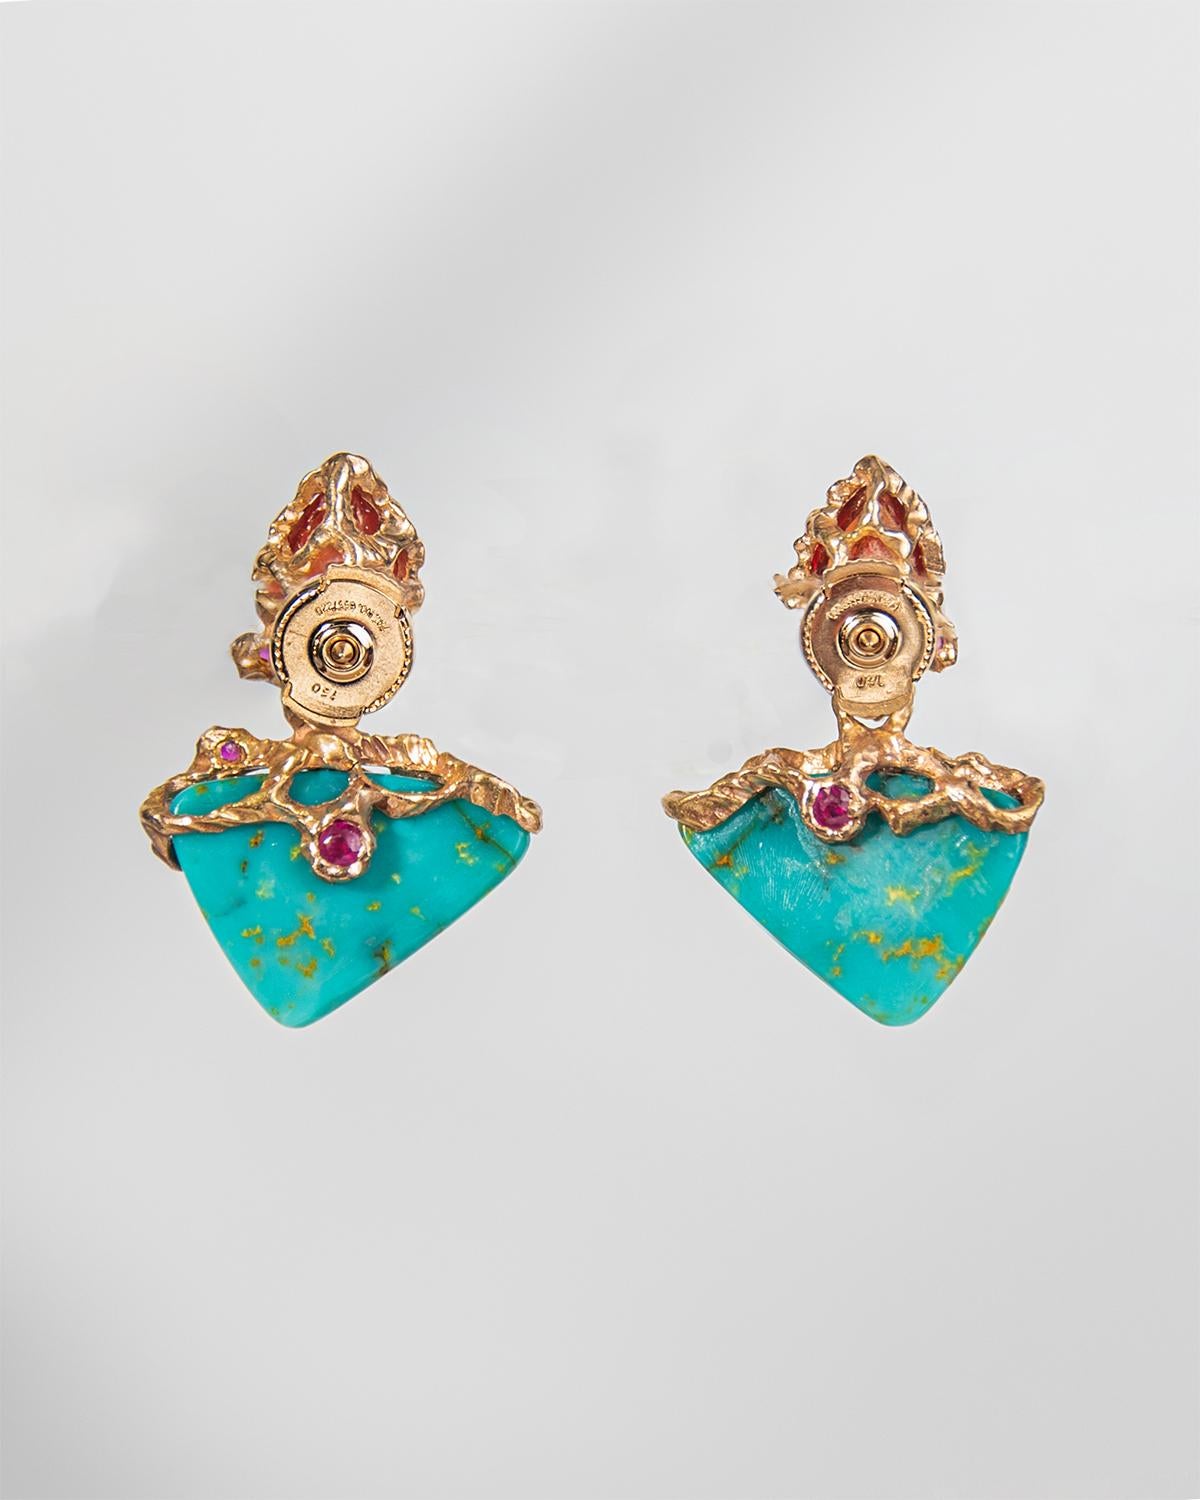 These detachable earrings are sophisticated pieces by Tvrrini as part of its Lava collection. 

Inspired by the volcano that impacted Atlantis, this design features a versatile way of styling as sculptural details are visible at all angles. The drop